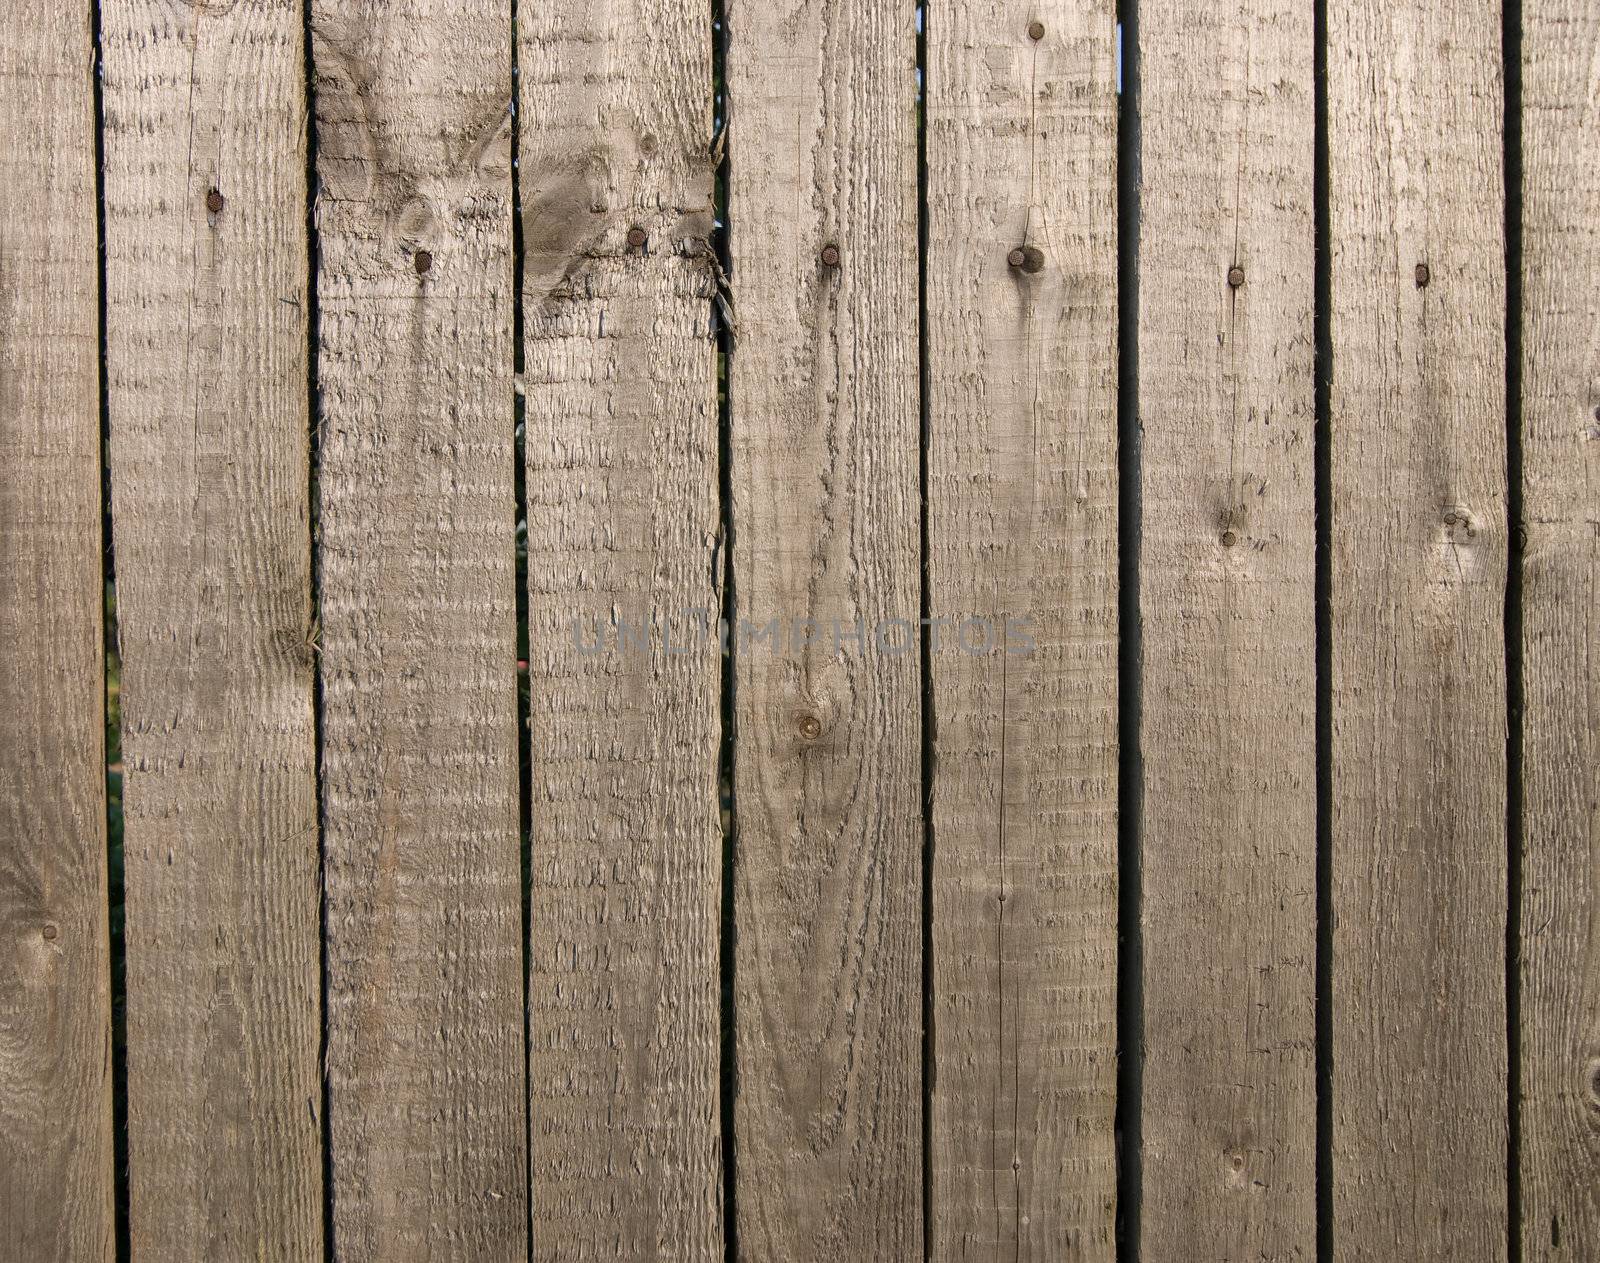 Wooden fence background with natural wood texture